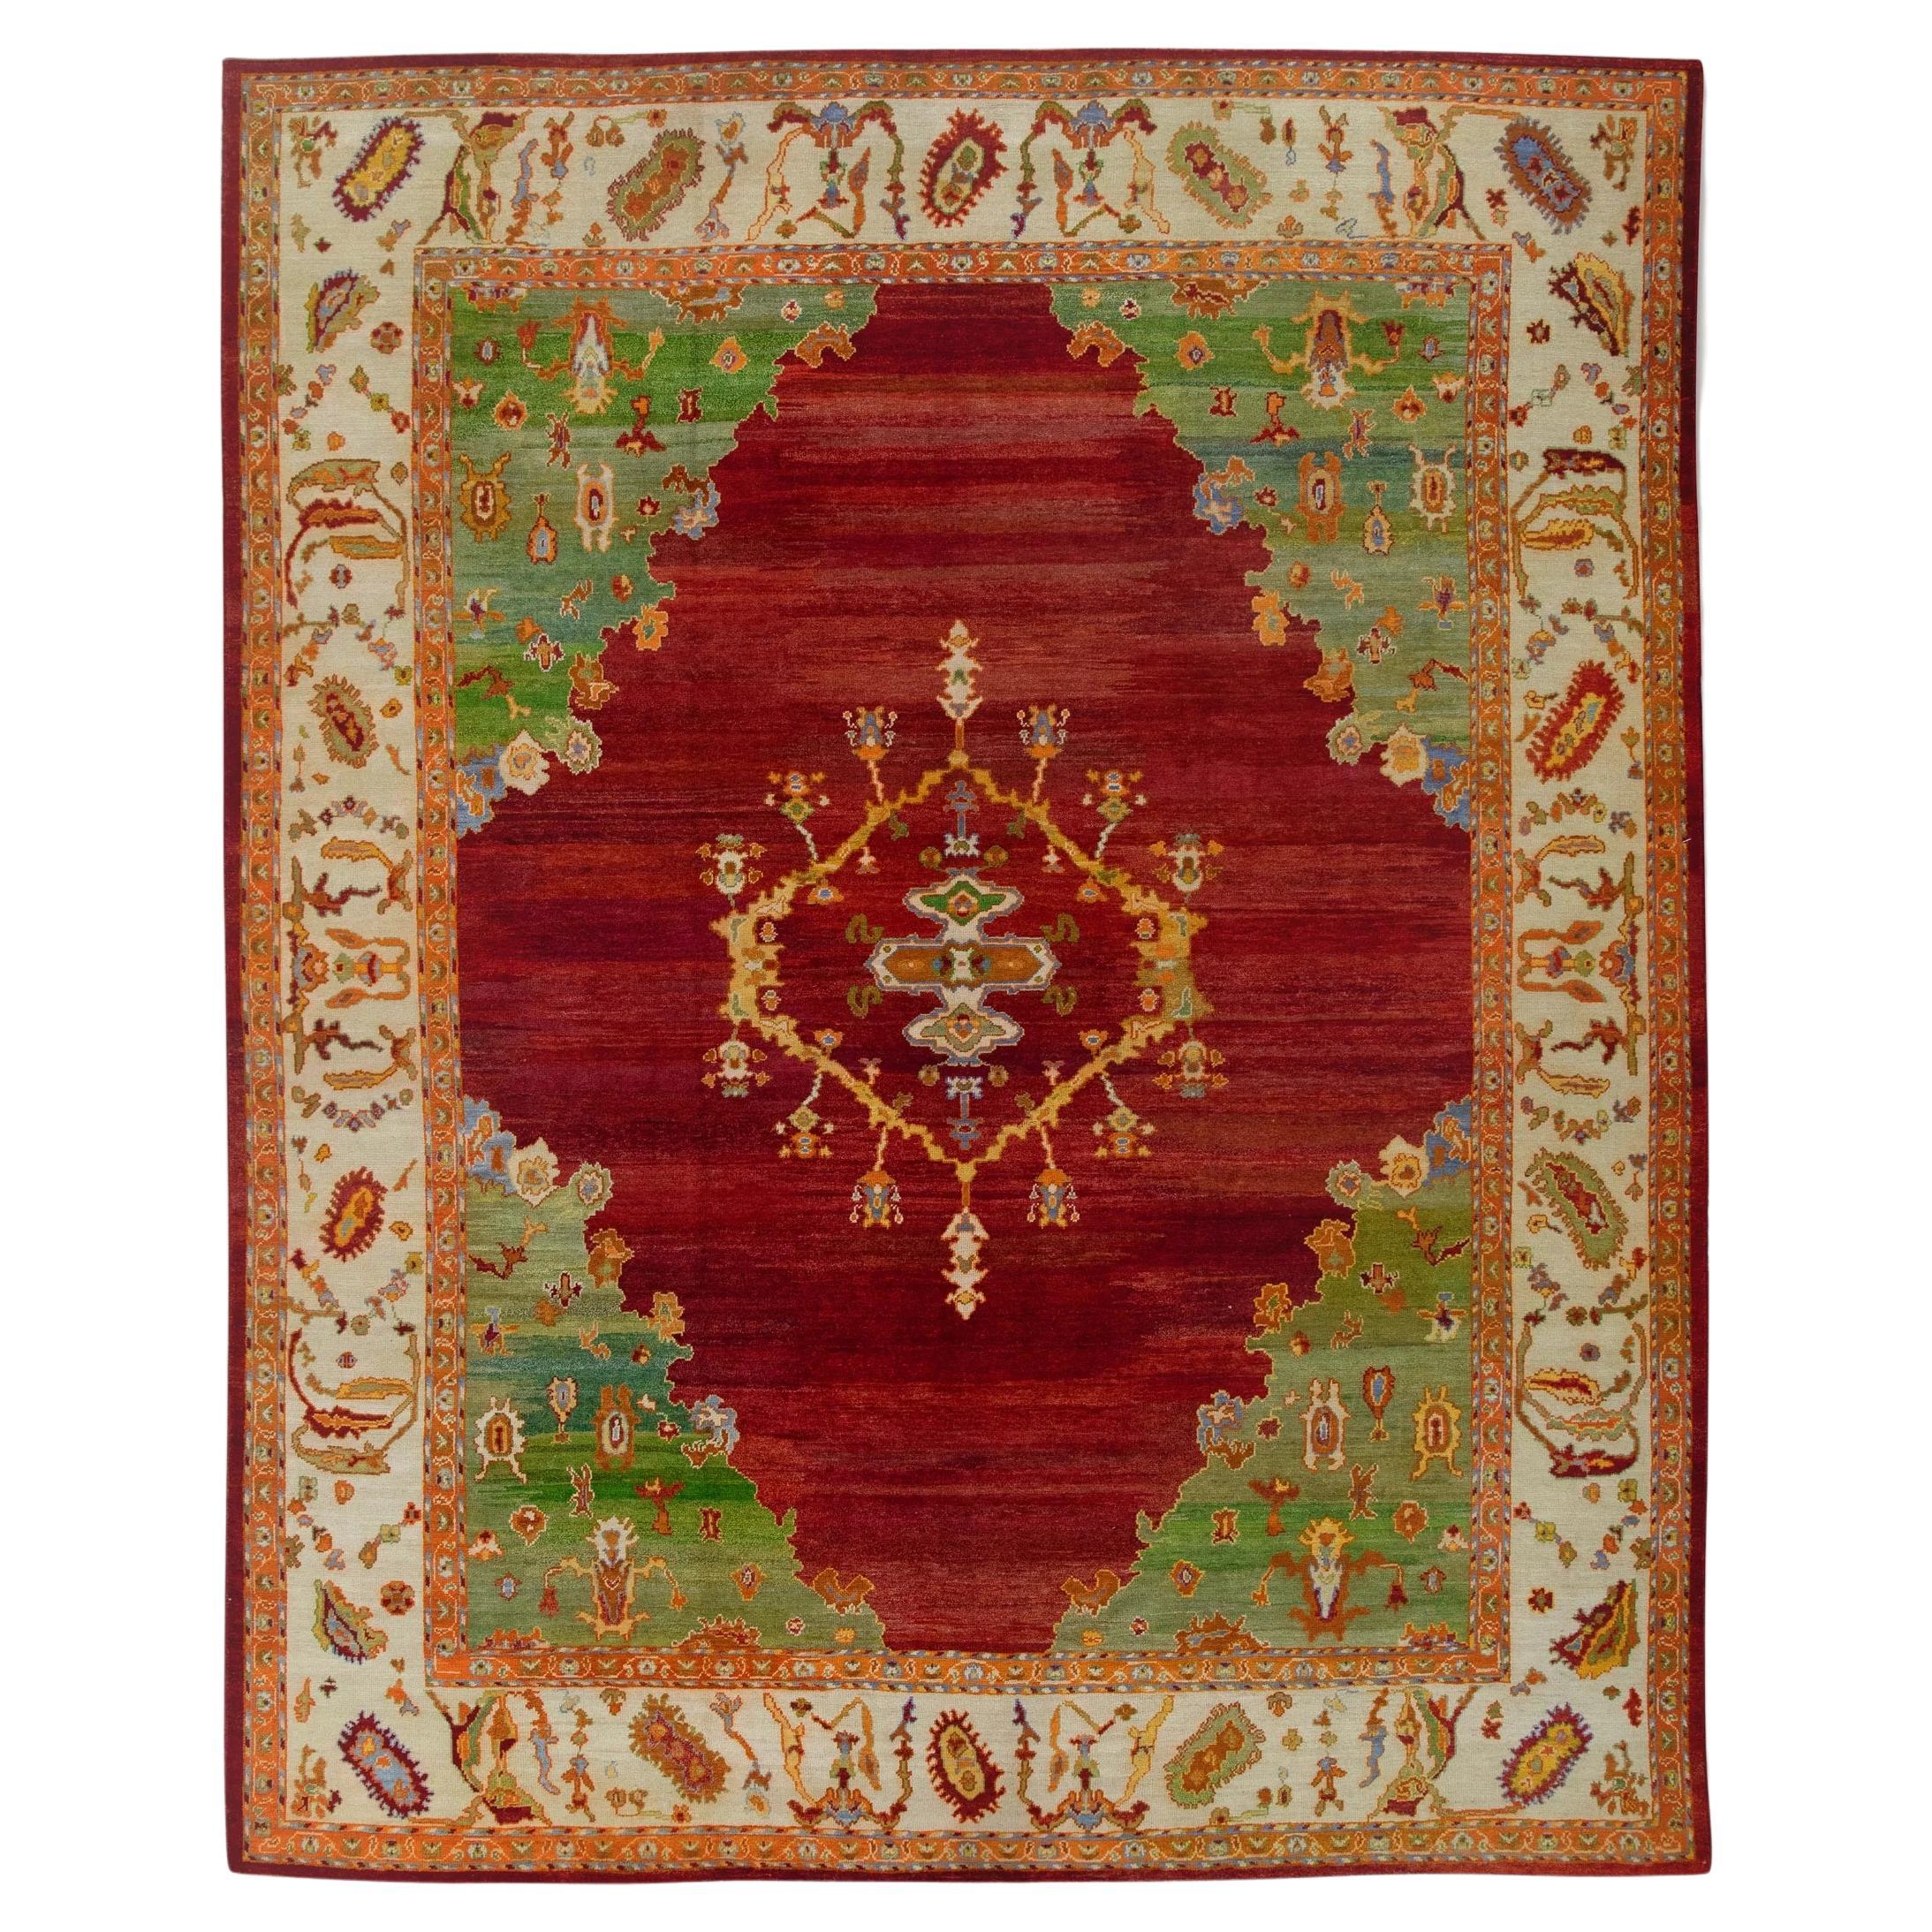 Green & Red Handwoven Old Wool Turkish Oushak Rug 12'10" x 15'11" For Sale